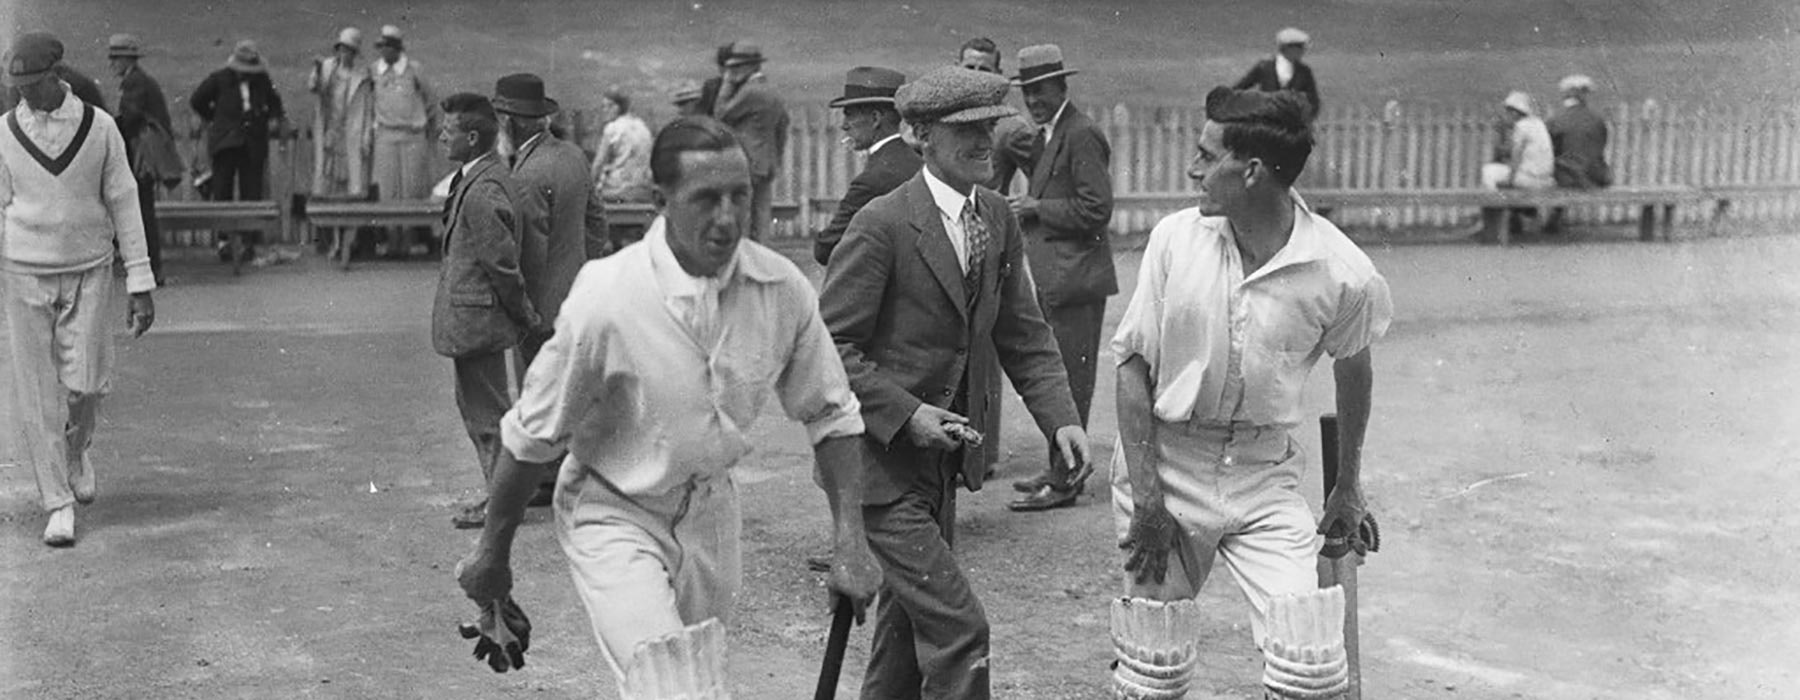 Men leave the cricket pitch, 1928